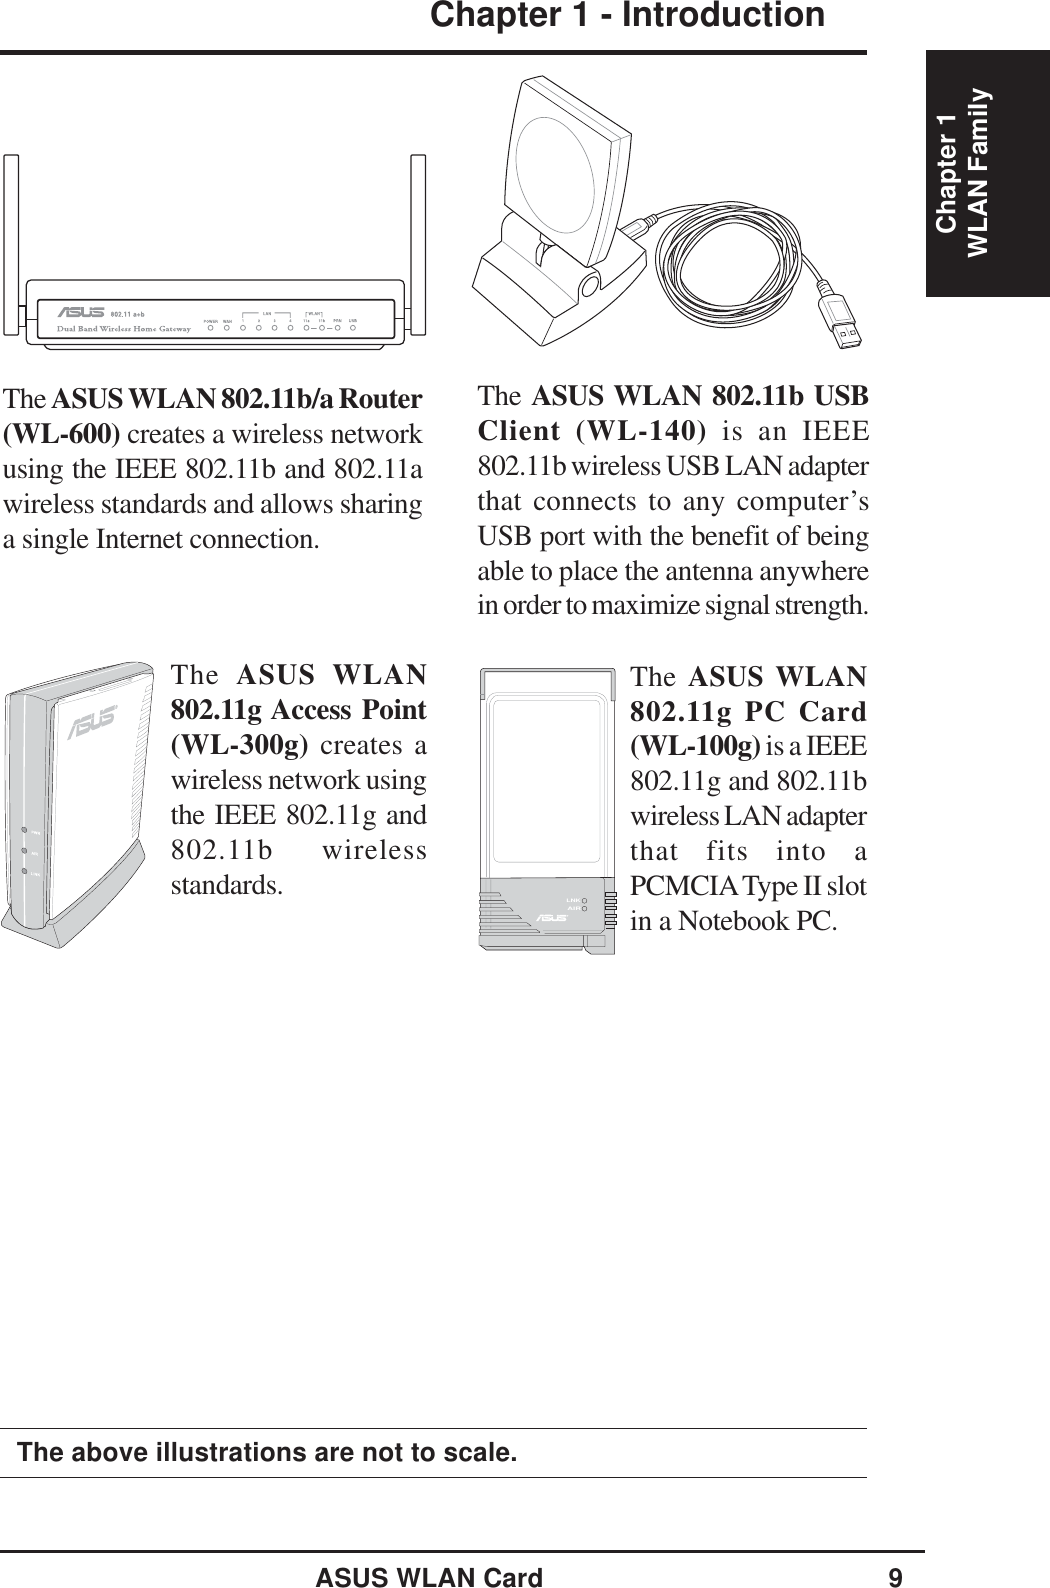 ASUS WLAN Card 9Chapter 1 - IntroductionChapter 1The ASUS WLAN 802.11b/a Router(WL-600) creates a wireless networkusing the IEEE 802.11b and 802.11awireless standards and allows sharinga single Internet connection.The ASUS WLAN 802.11b USBClient (WL-140) is an IEEE802.11b wireless USB LAN adapterthat connects to any computer’sUSB port with the benefit of beingable to place the antenna anywherein order to maximize signal strength.The  ASUS WLAN802.11g Access Point(WL-300g) creates awireless network usingthe IEEE 802.11g and802.11b wirelessstandards.The above illustrations are not to scale.LNKAIRThe ASUS WLAN802.11g PC Card(WL-100g) is a IEEE802.11g and 802.11bwireless LAN adapterthat fits into aPCMCIA Type II slotin a Notebook PC.WLAN Family